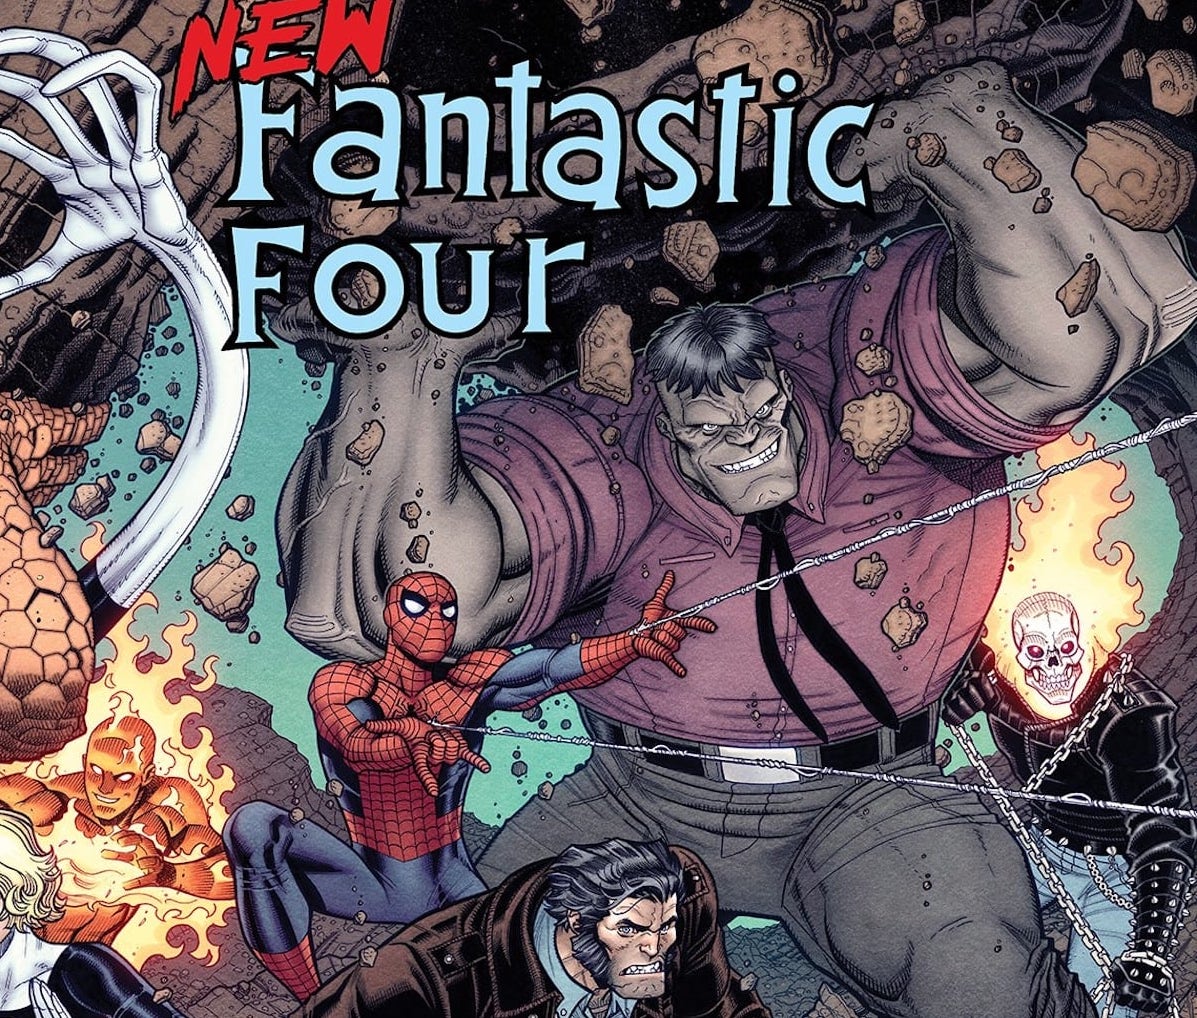 Marvel launching 'New Fantastic Four' #1 on May 25th